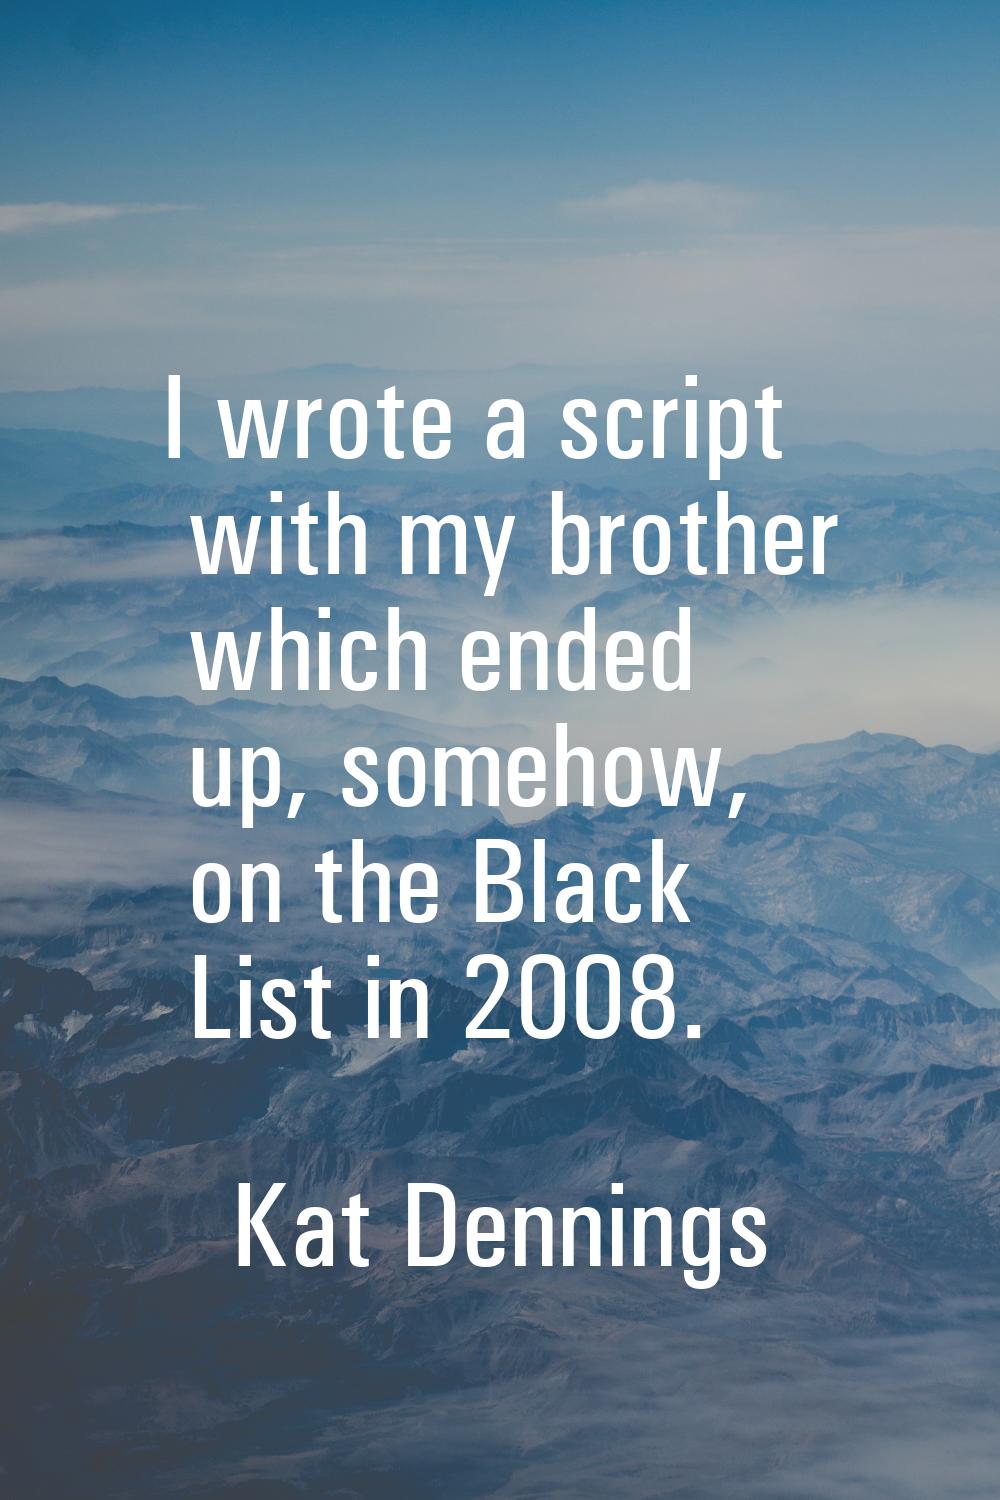 I wrote a script with my brother which ended up, somehow, on the Black List in 2008.